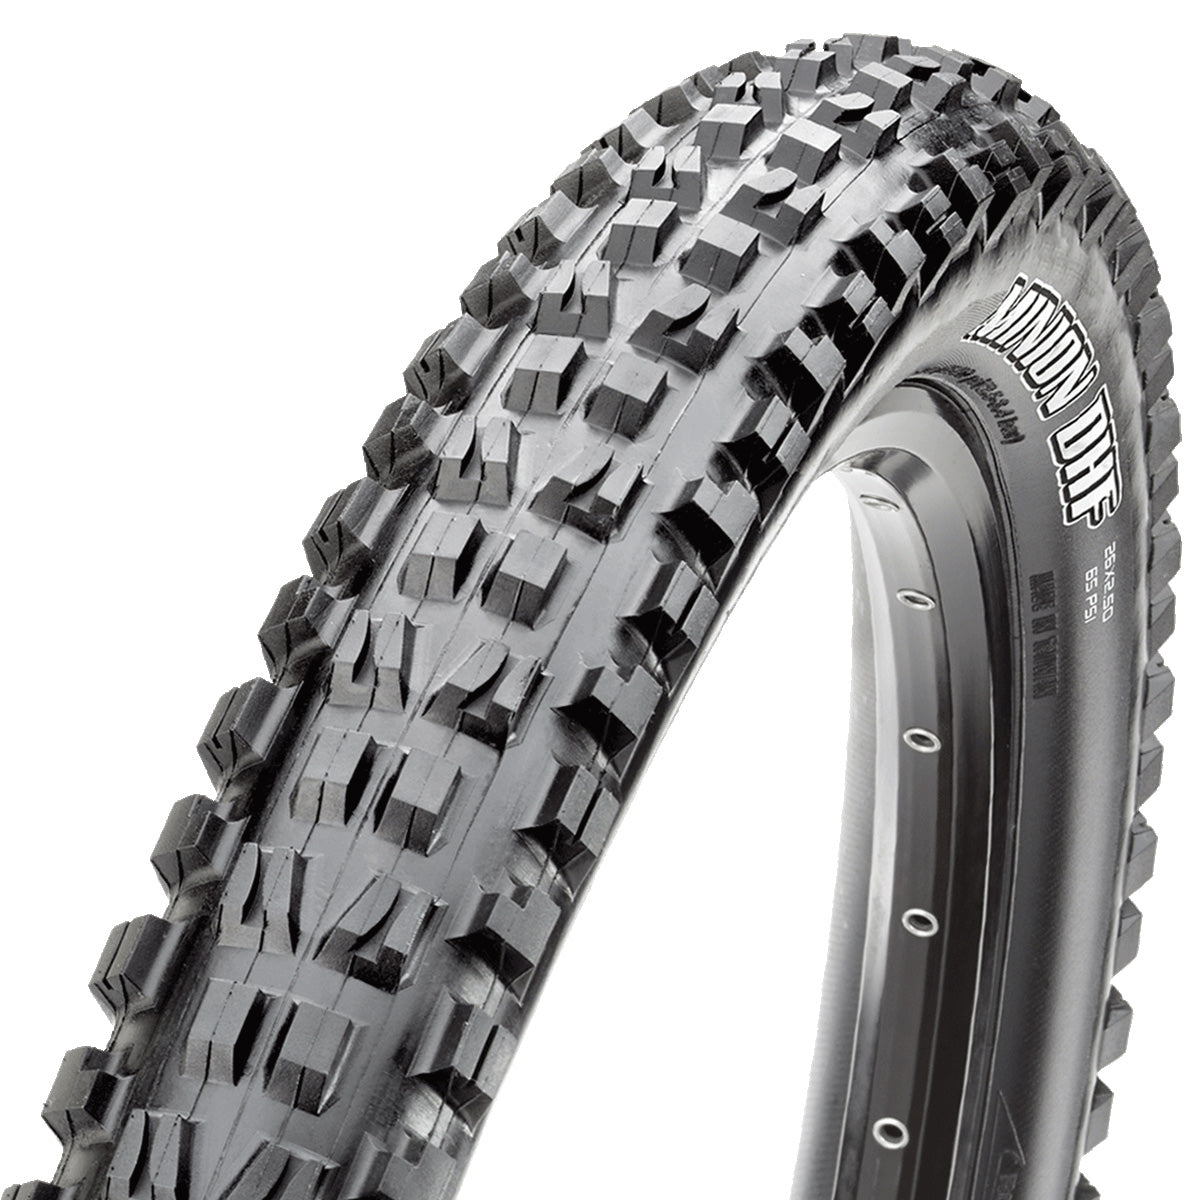 Maxxis Minion DHF 26/27.5/29" Foldable 3C/EXO/TR MTB Bike Tires-Bicycle Tires-Maxxis